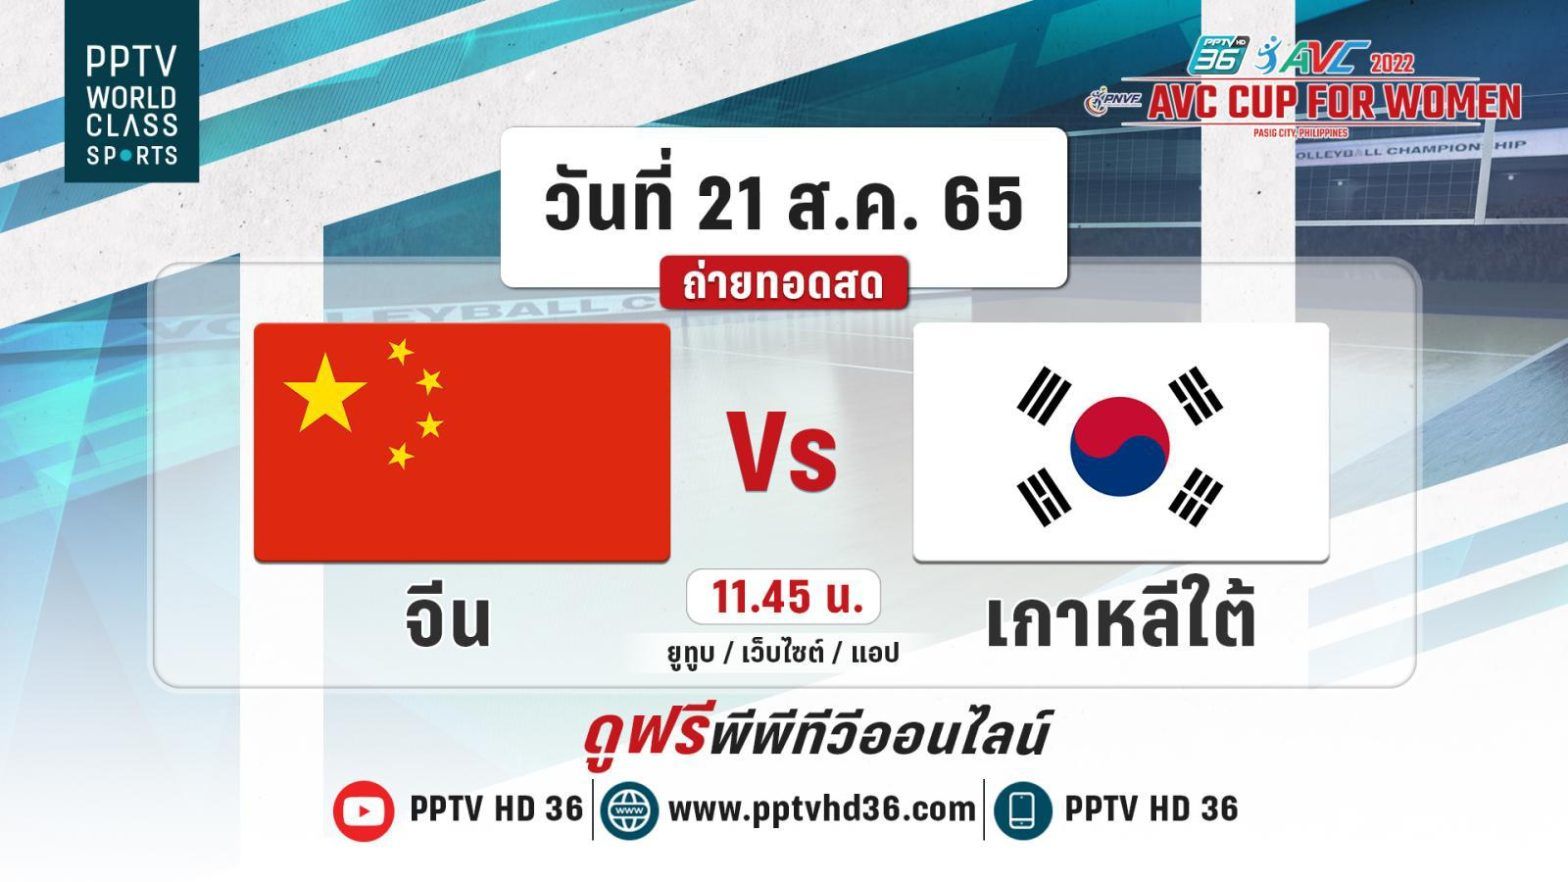 Watch women's volleyball live AVC Cup 2022 China meets South Korea 21 Aug 65:  PPTVHD36